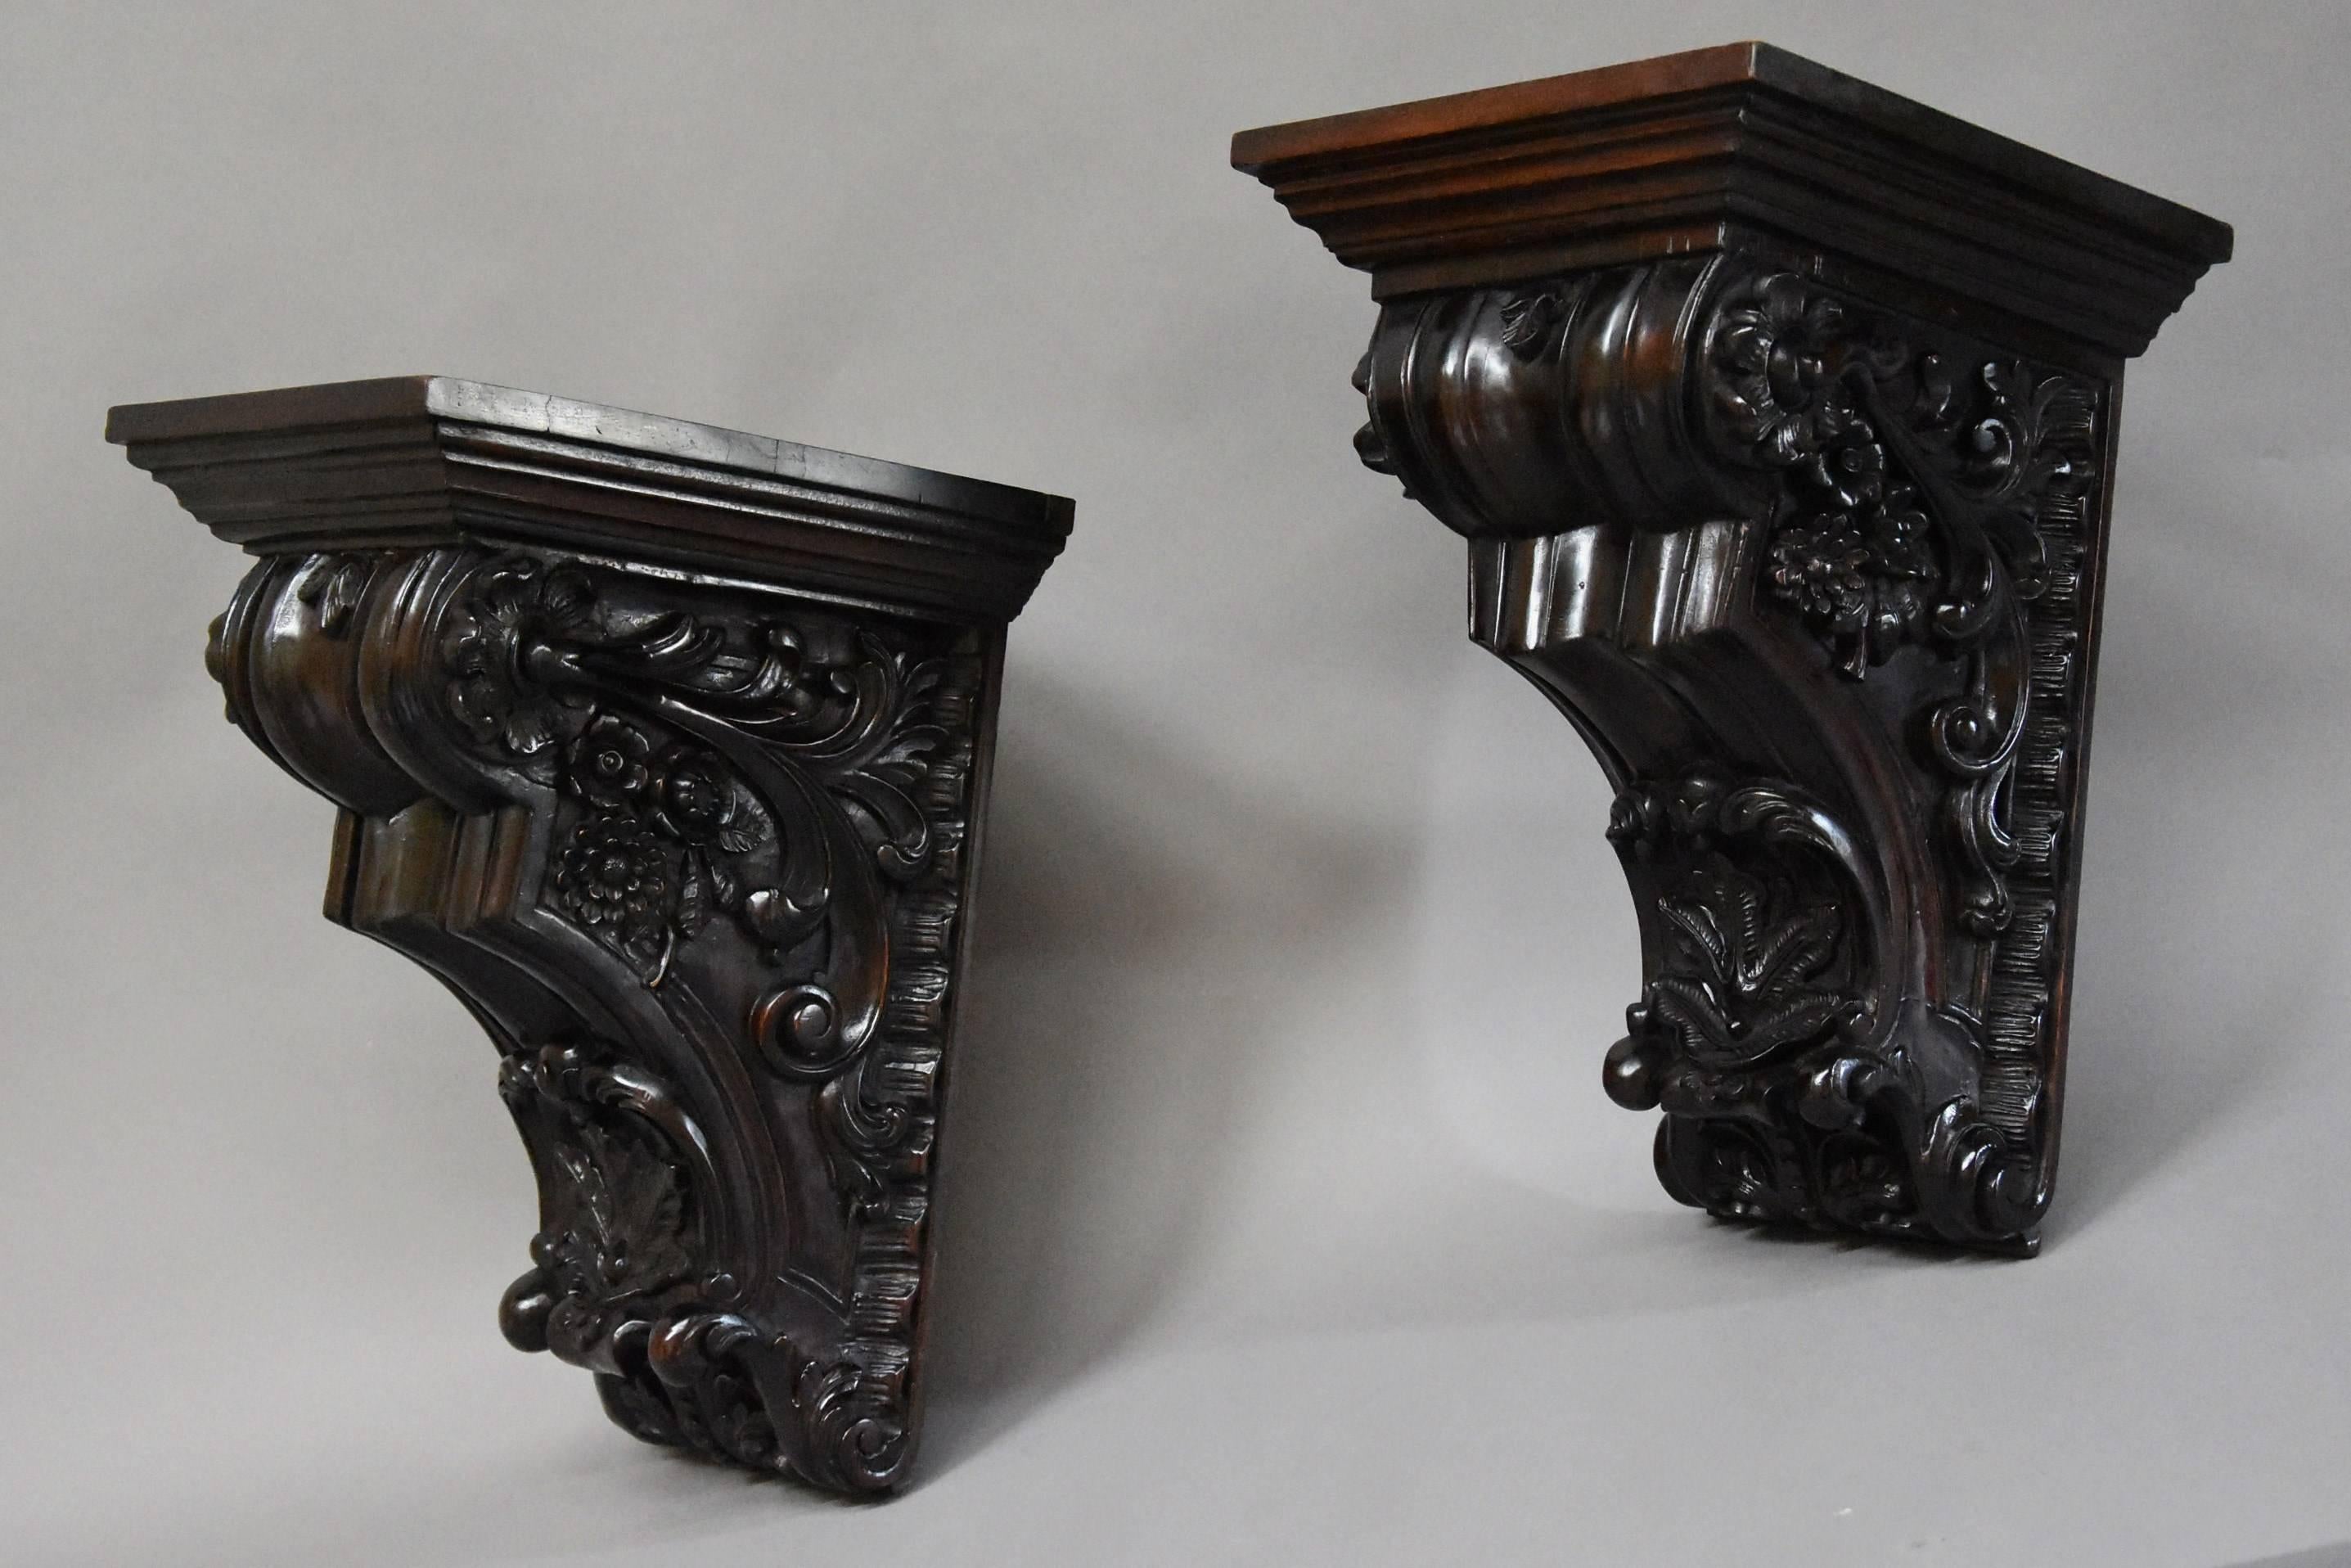 A large pair of late 19th century decorative carved mahogany architectural brackets.

This pair of brackets consist of solid mahogany tops with a moulded edge leading down to a shaped and carved design with superb floral and foliate carved